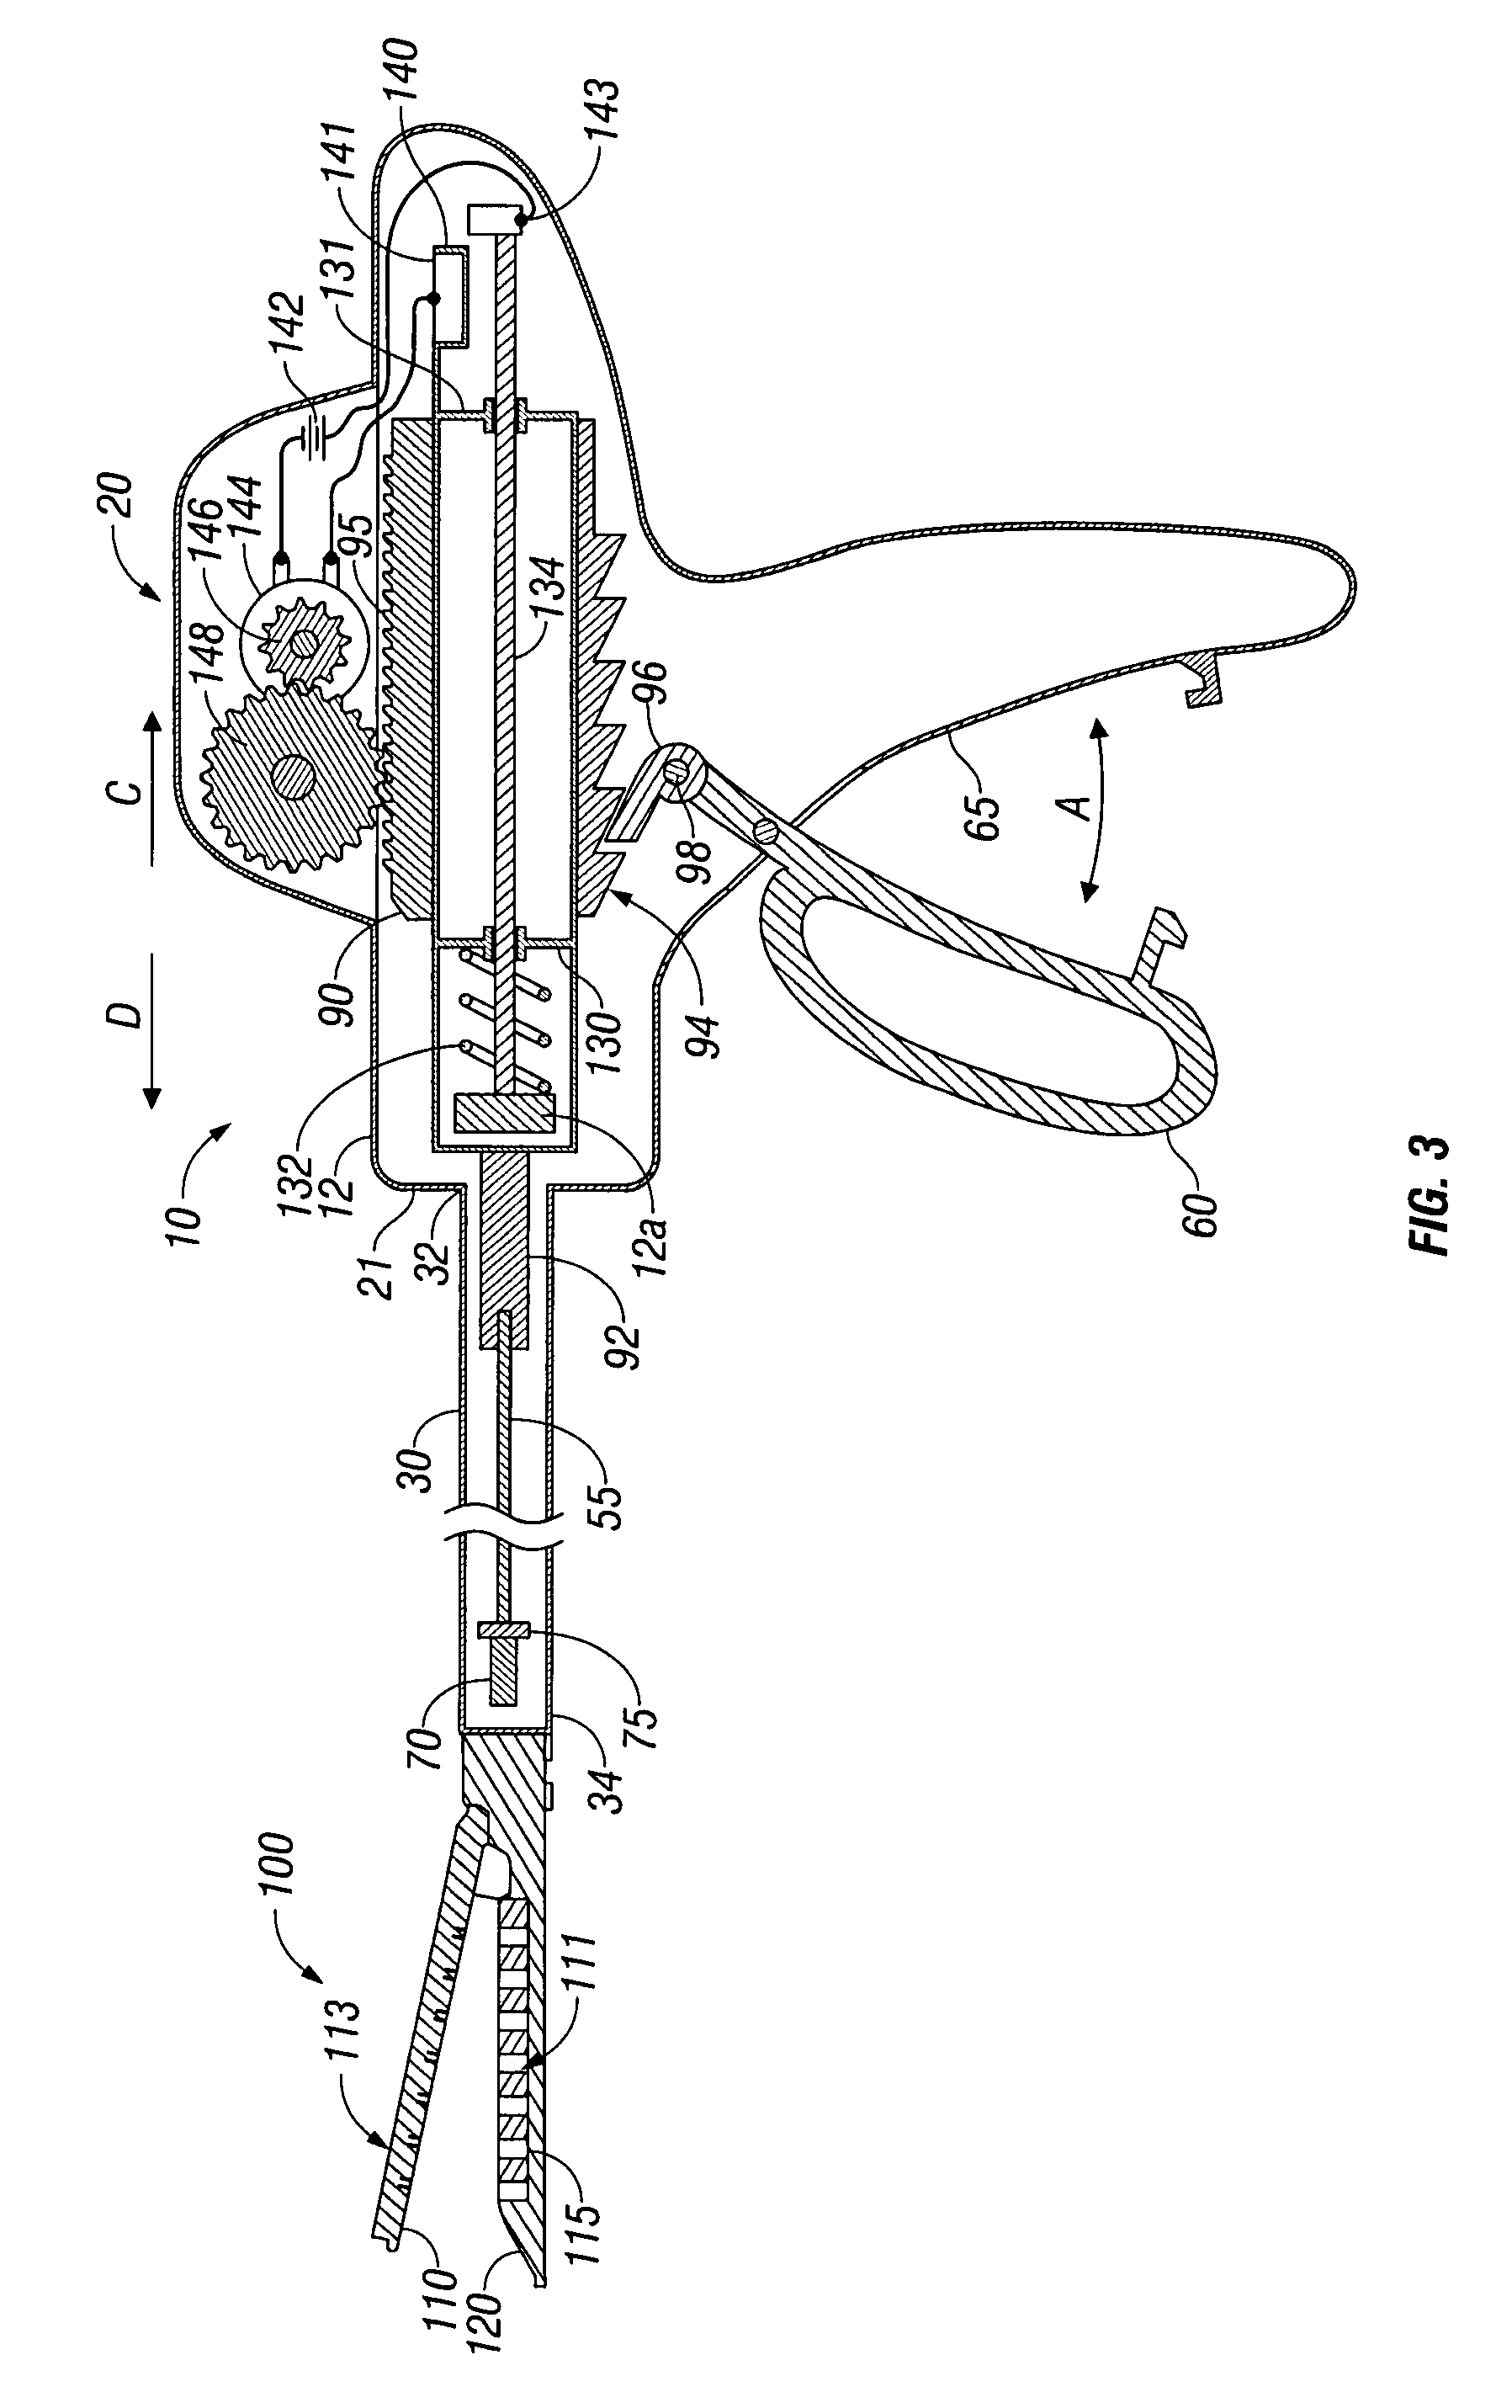 Powered surgical stapling device